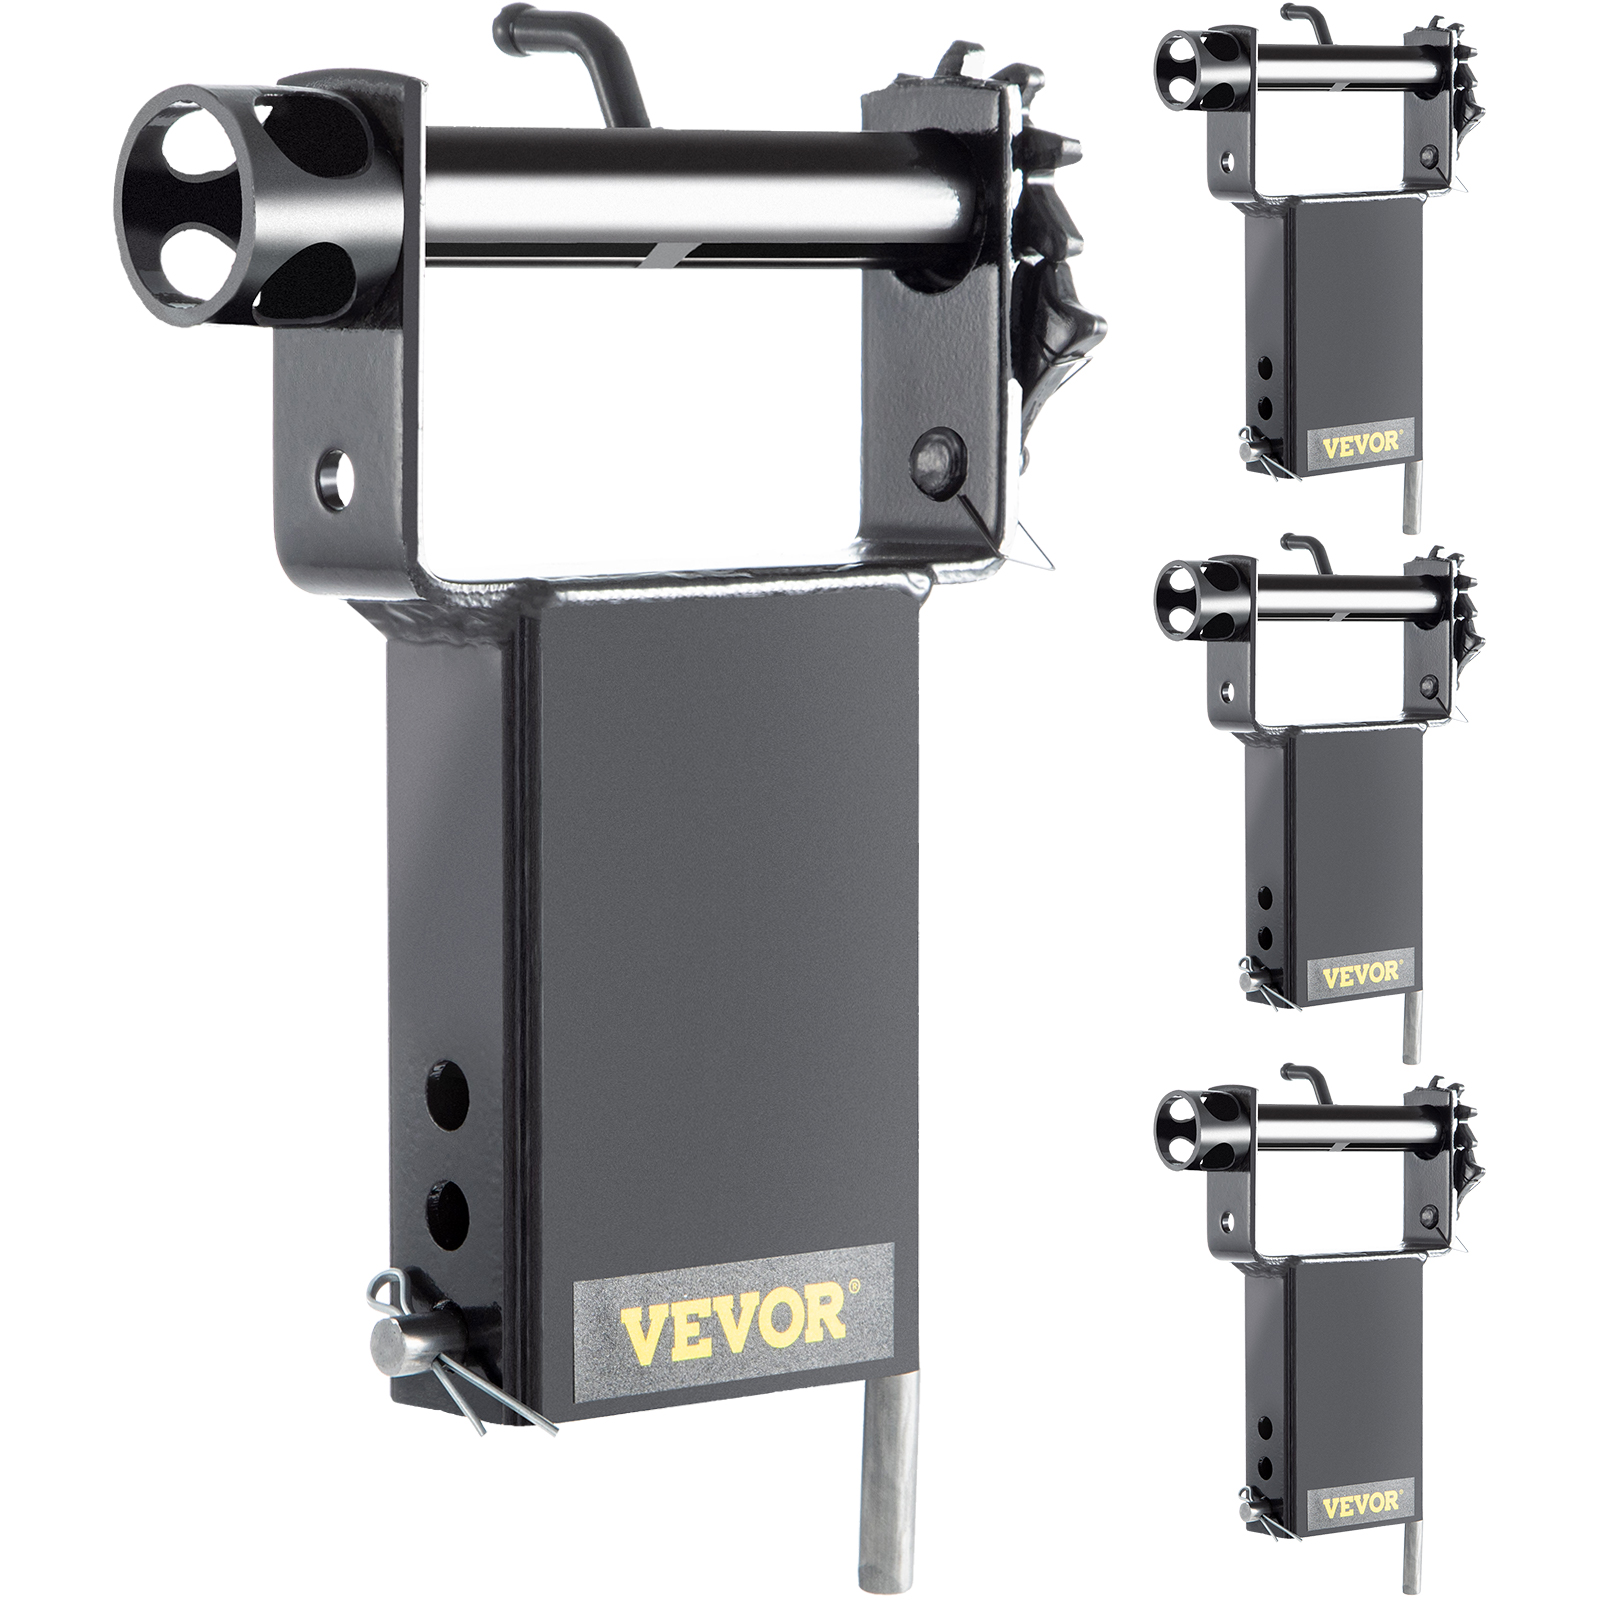 VEVOR 5400lb Pin Stake Pocket, Pack Heavy Duty Trailer Winches w/ 5400  lbs Secure Working Capacity  Holes for Height Adjustment, Removable Tie  Down Utility for Flatbed Cargo Trucks, Black VEVOR US